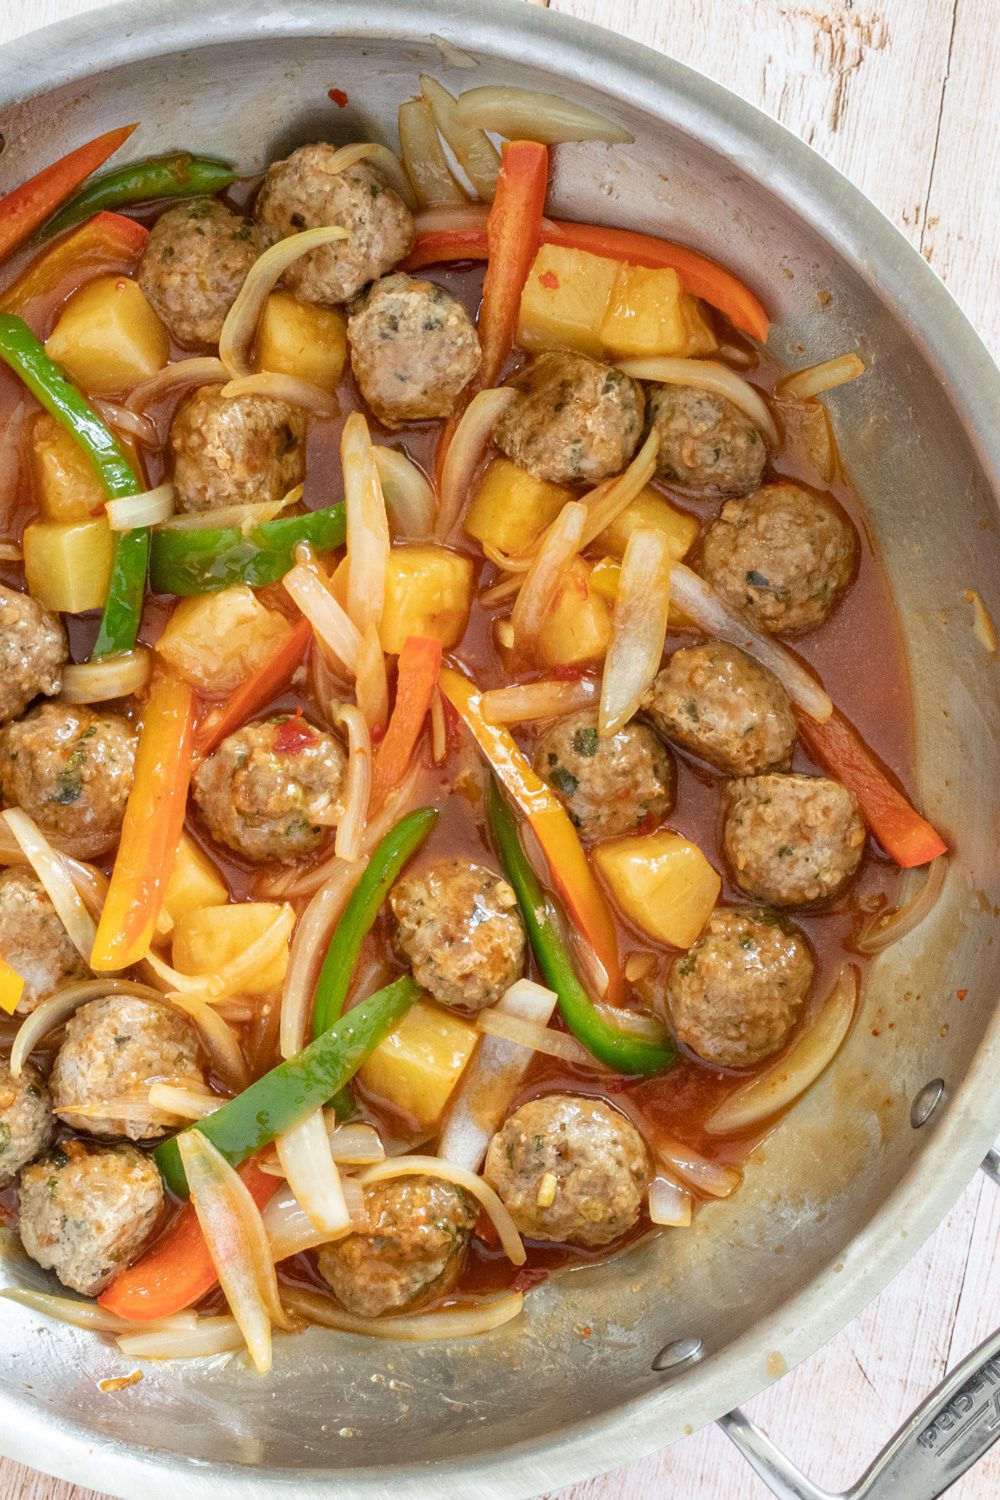 sweet and sour pork meatballs with stir-fried vegetable in the pan